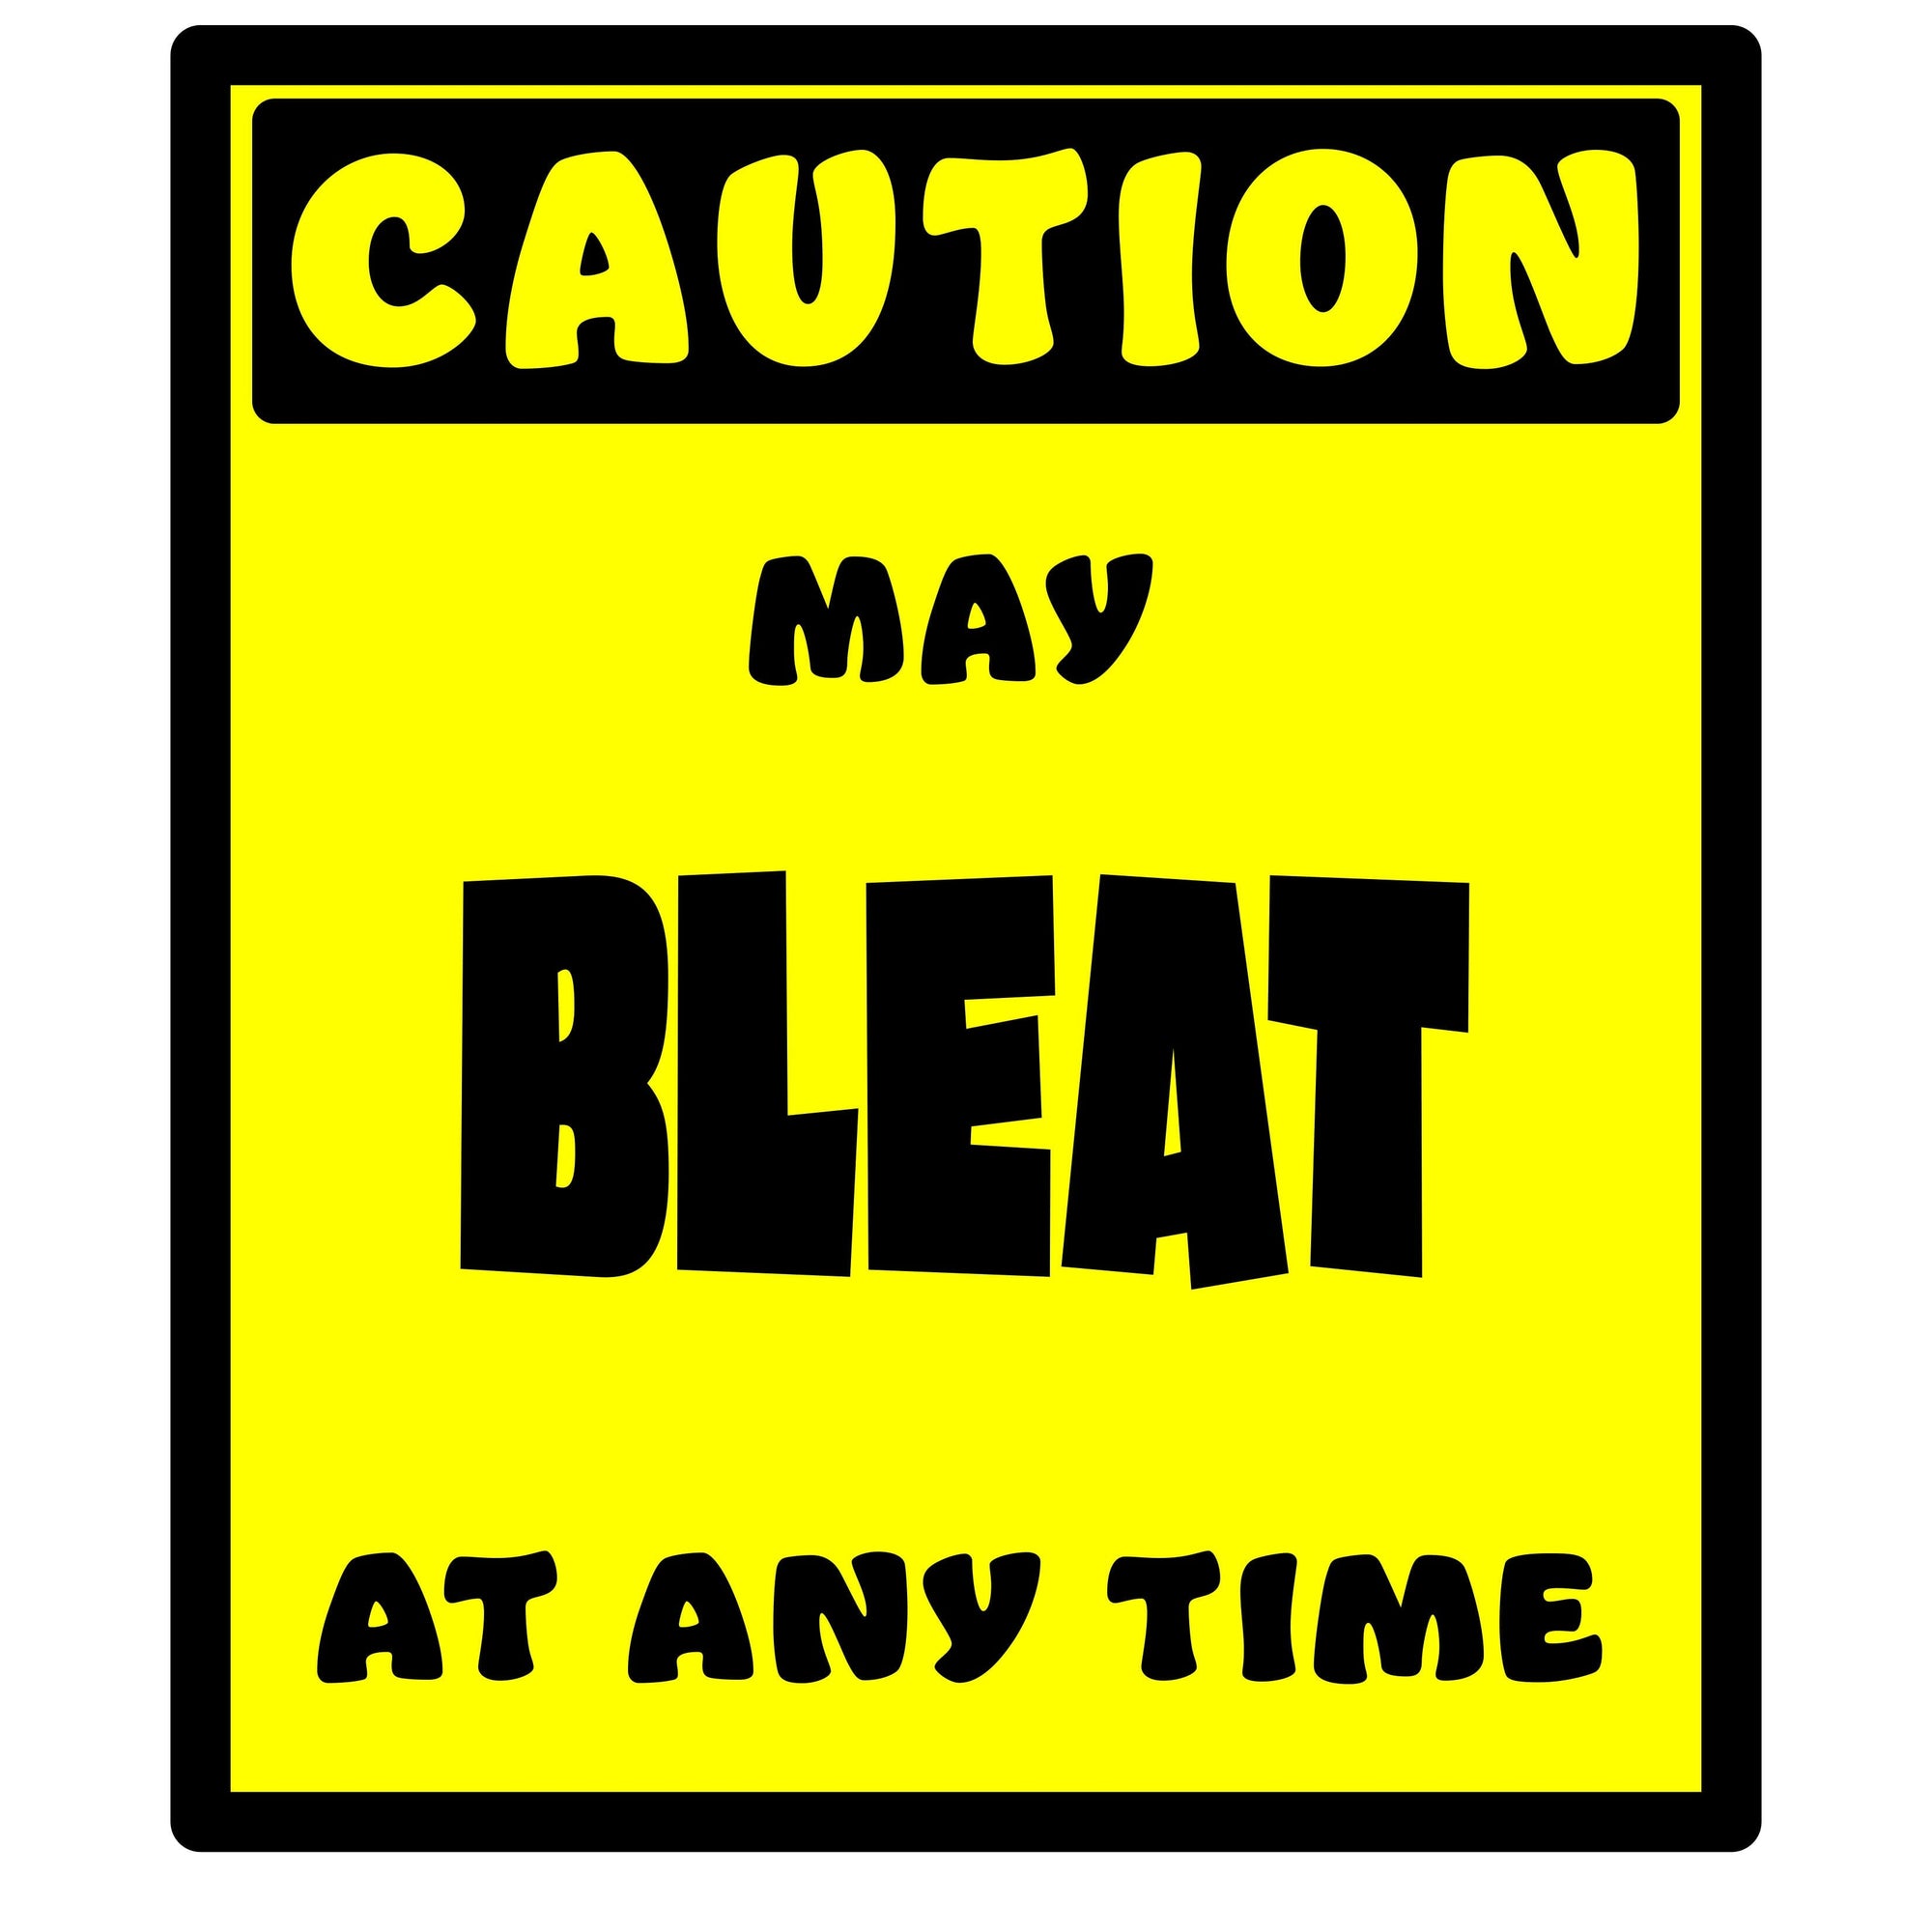 Whootorca - Caution! Series - CAUTION! May BLEAT at any time!